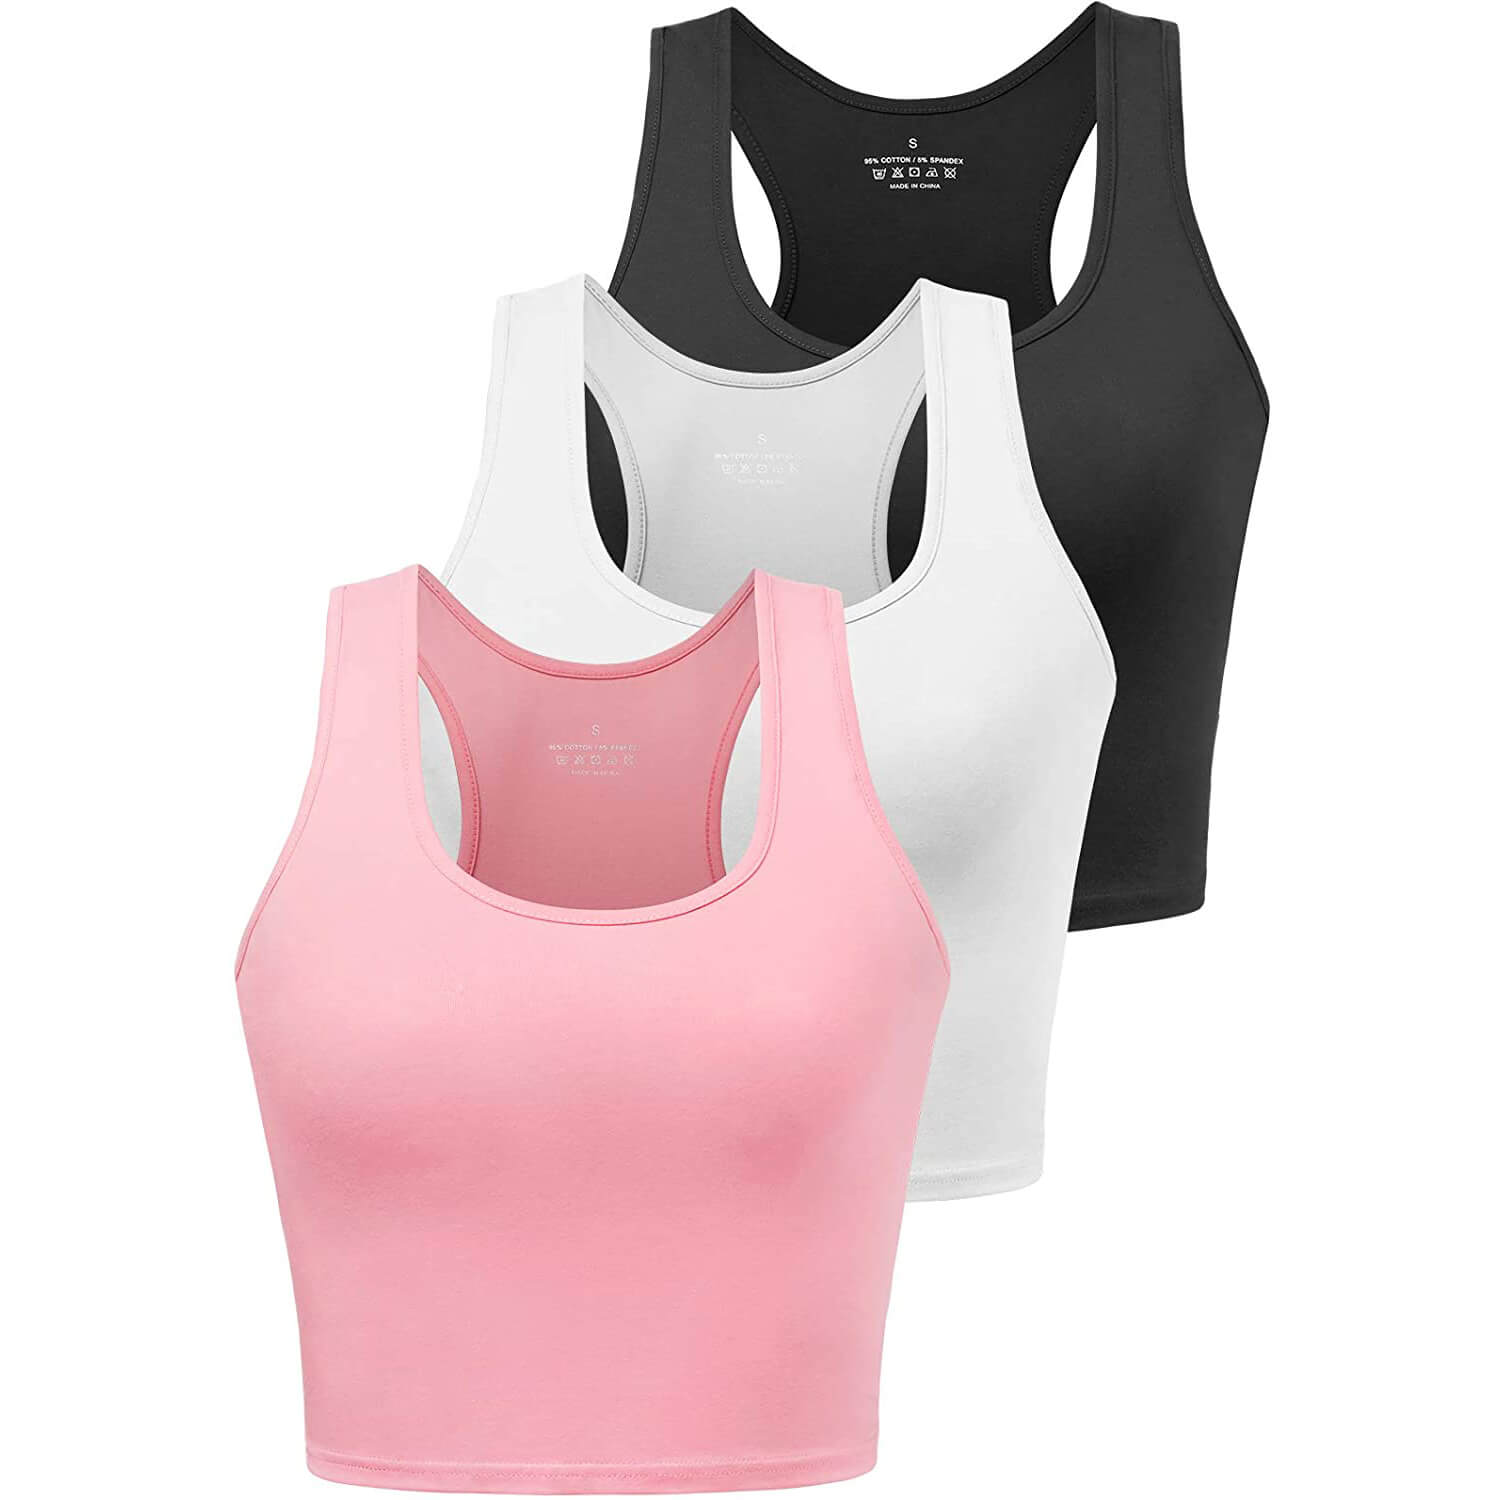 Women's Crop Tops Workout Athletic Shirts 05